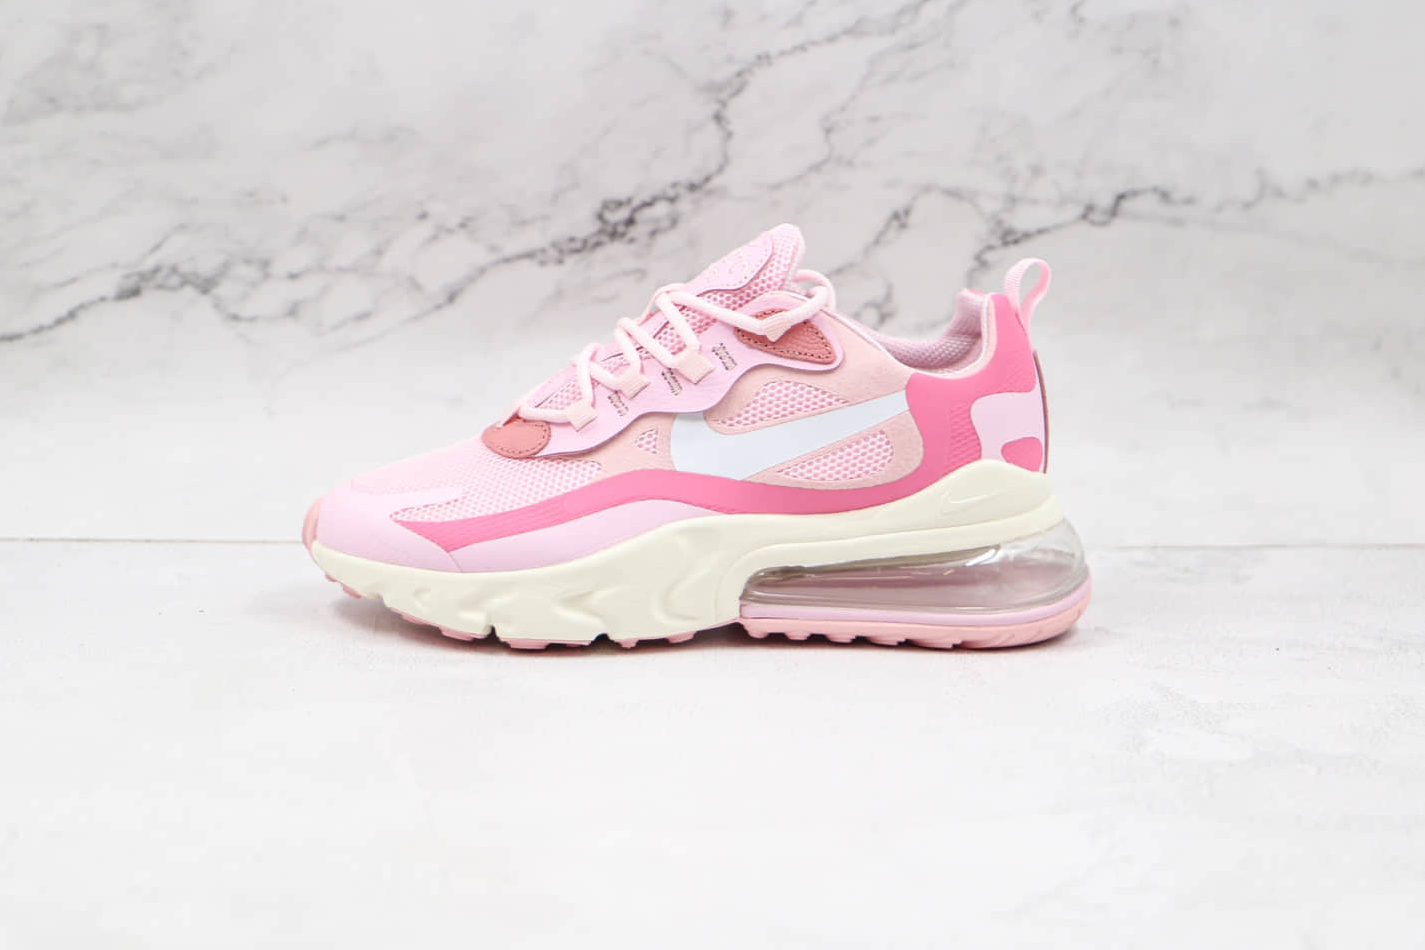 Nike Air Max 270 React 'Pink Foam' CZ0364-600 - Stylish and Comfortable Footwear with Vibrant Pink Accents